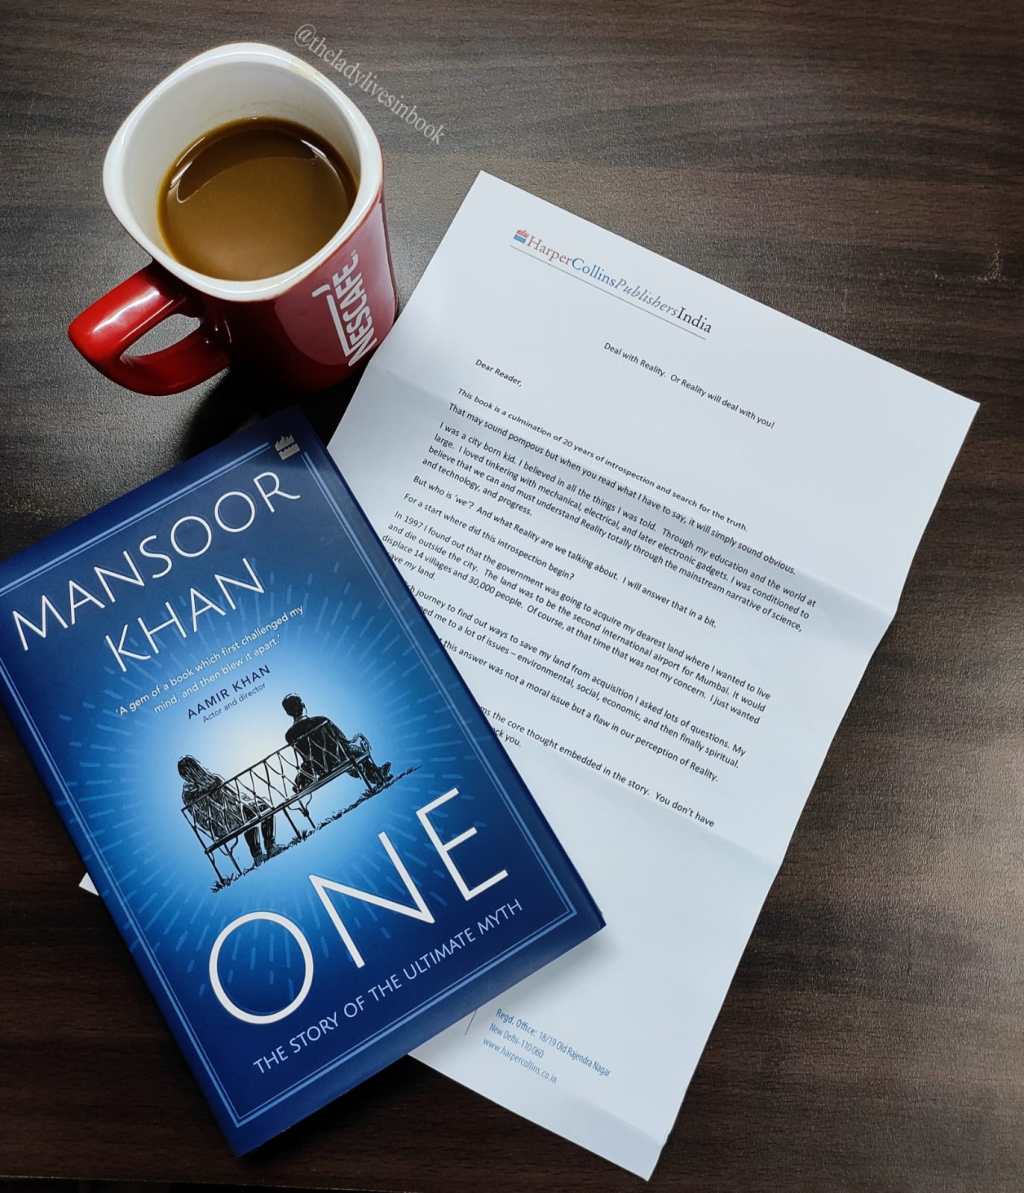 What a mind-boggling, brilliant return of Mansoor Khan: One – Book Review